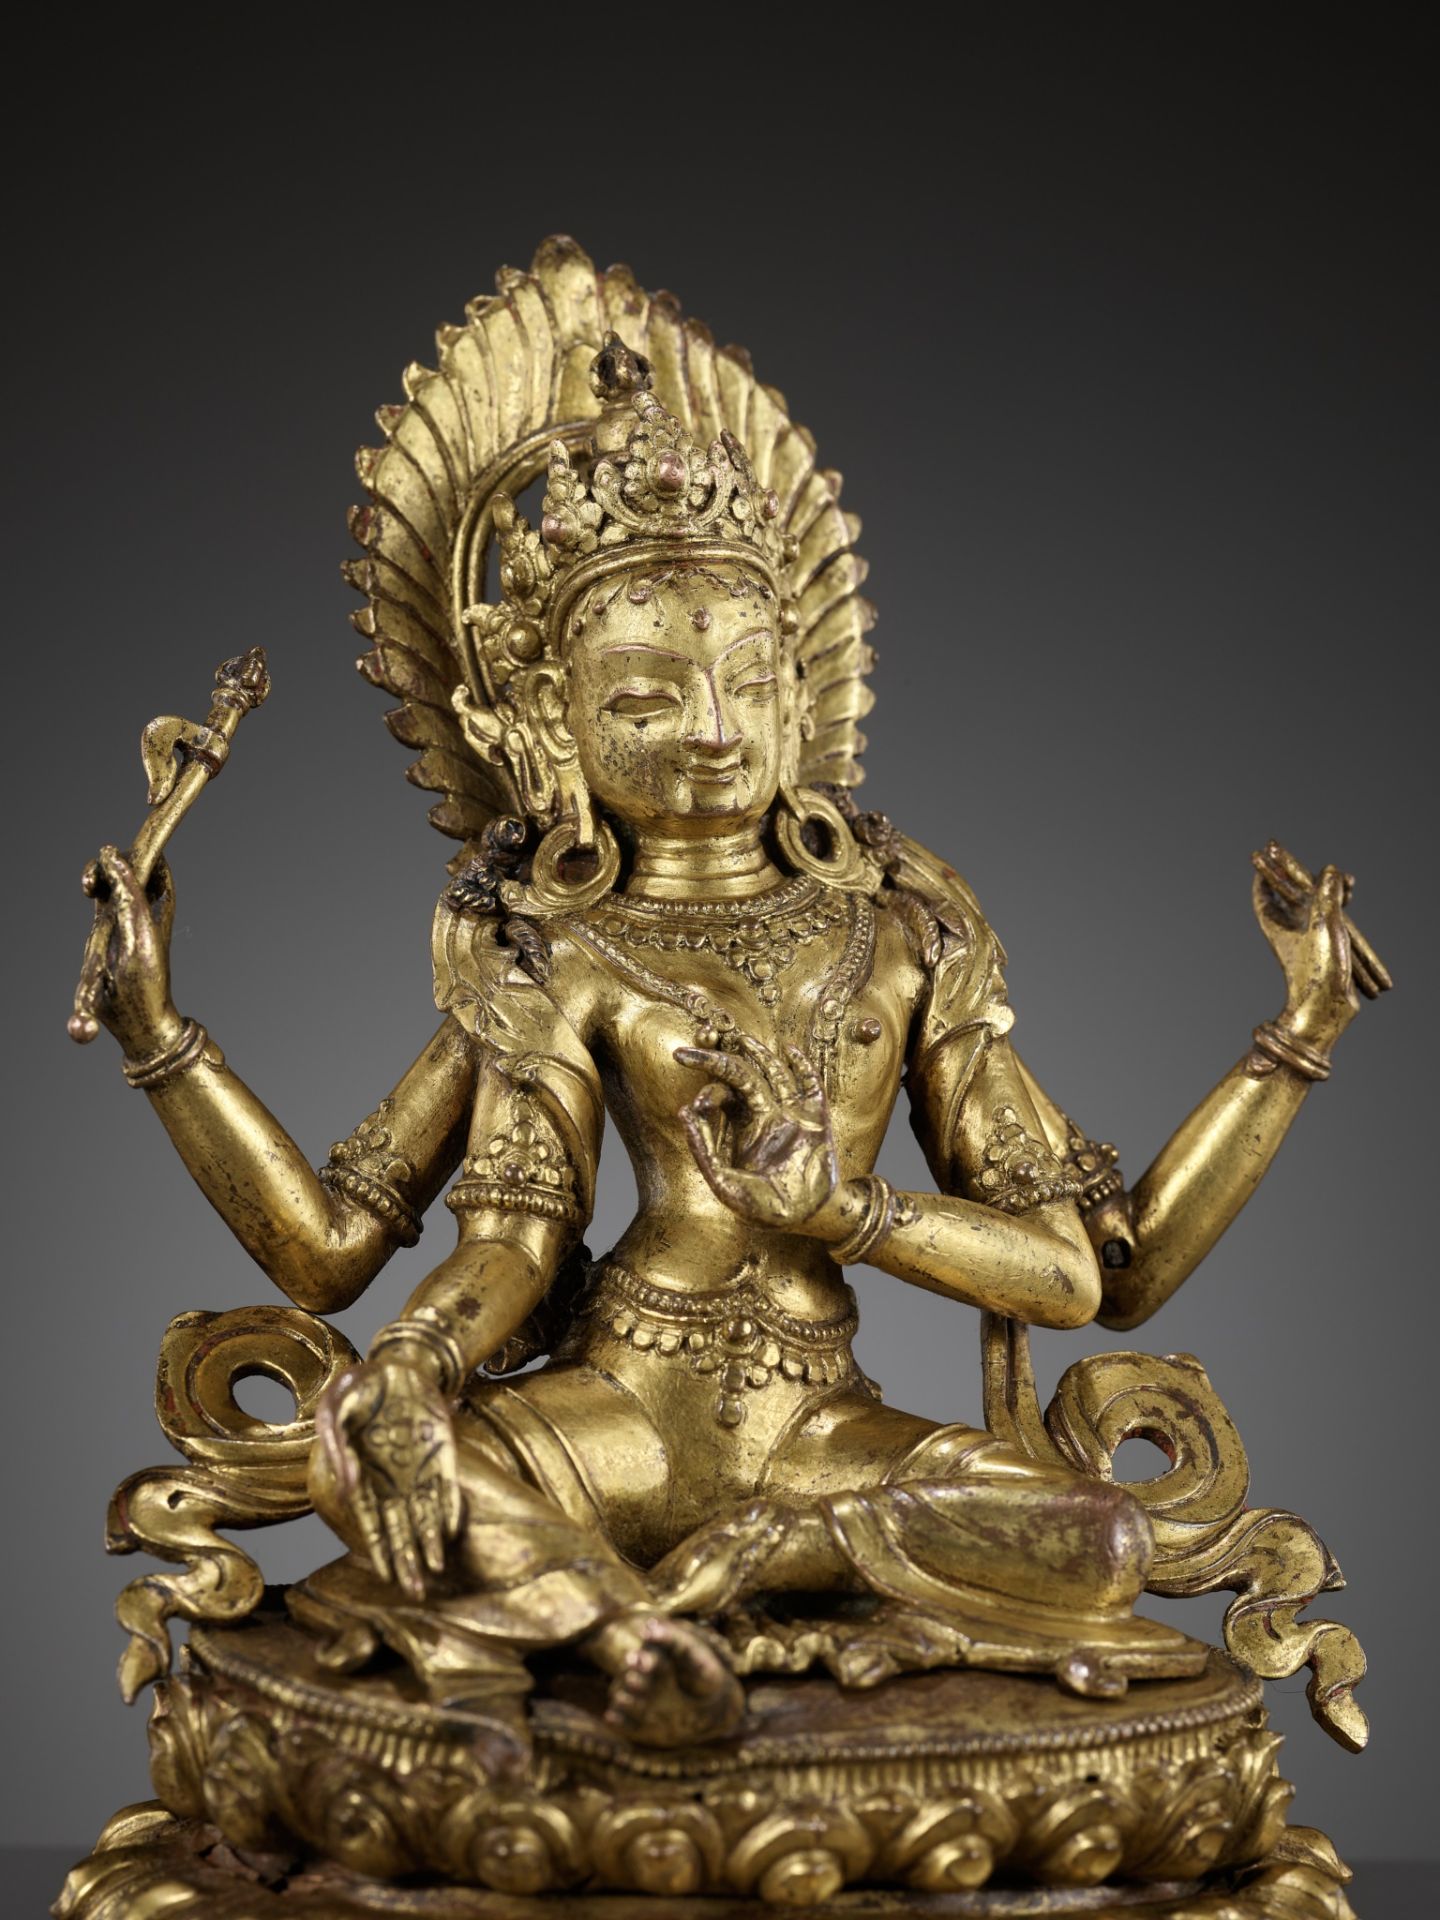 A CAST AND REPOUSSE GILT COPPER ALLOY FIGURE OF TARA, NEPAL, 18TH-19TH CENTURY - Image 3 of 13